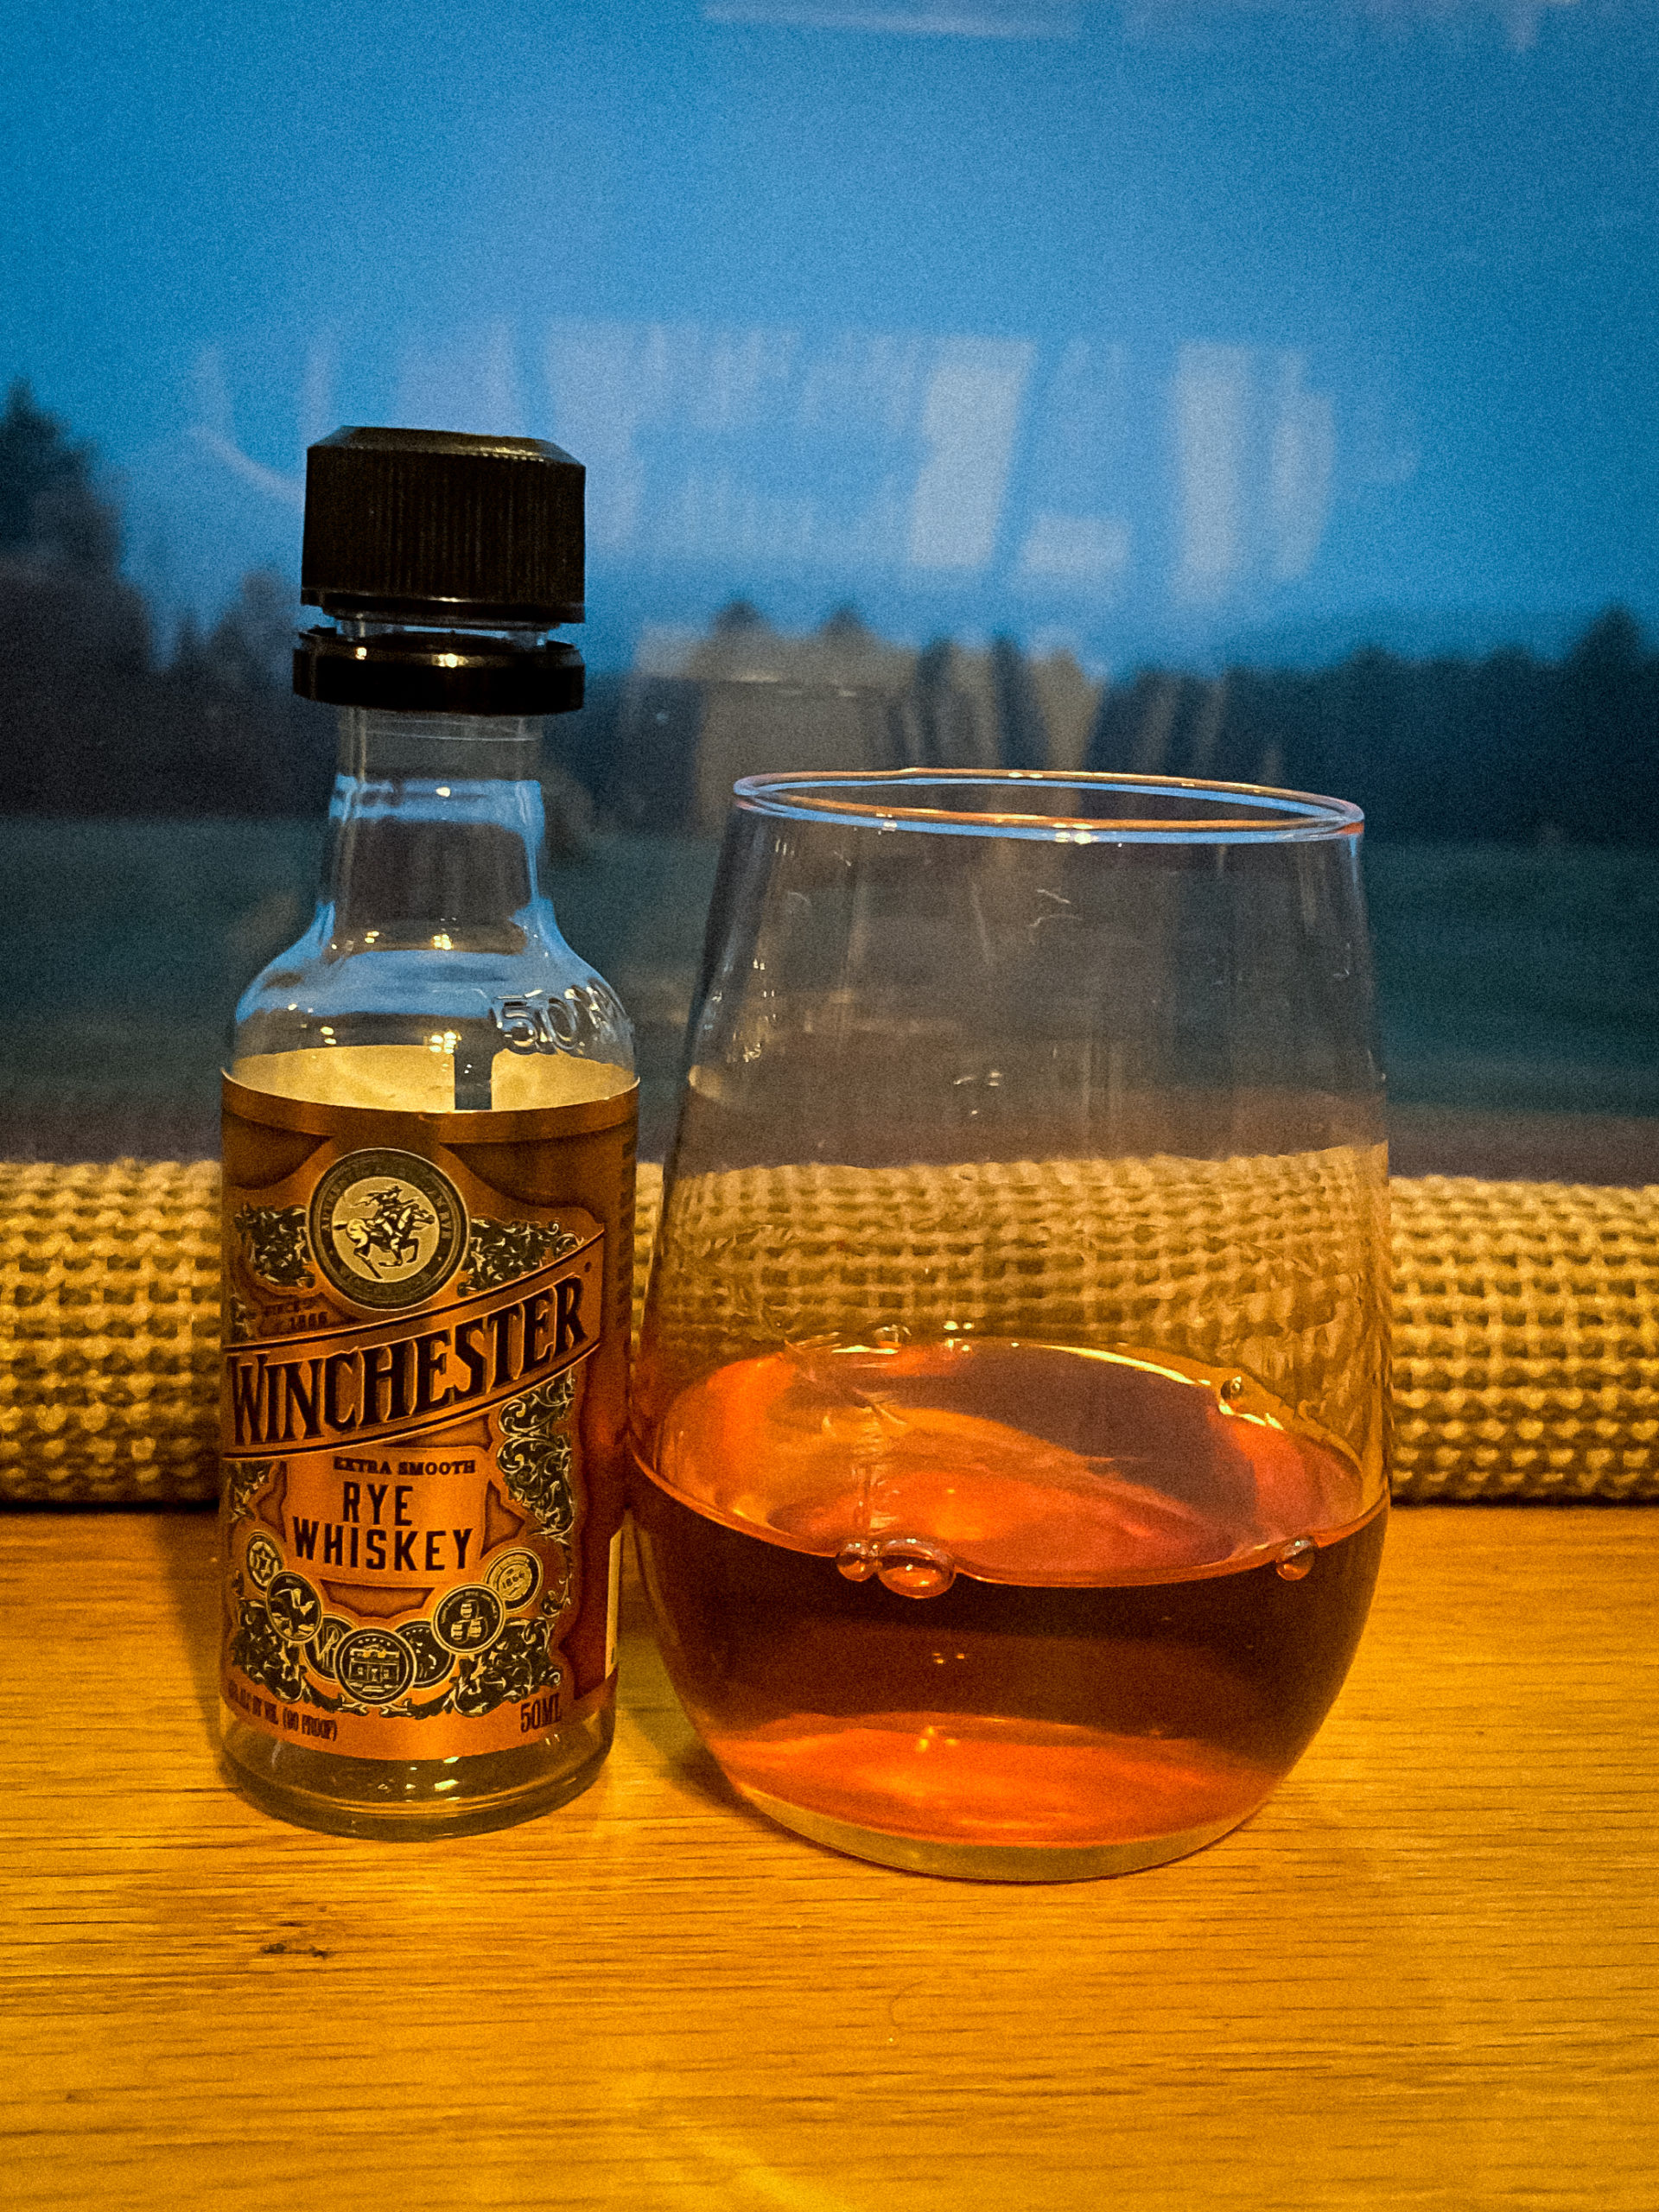 Review #312 – Winchester Rye Whiskey